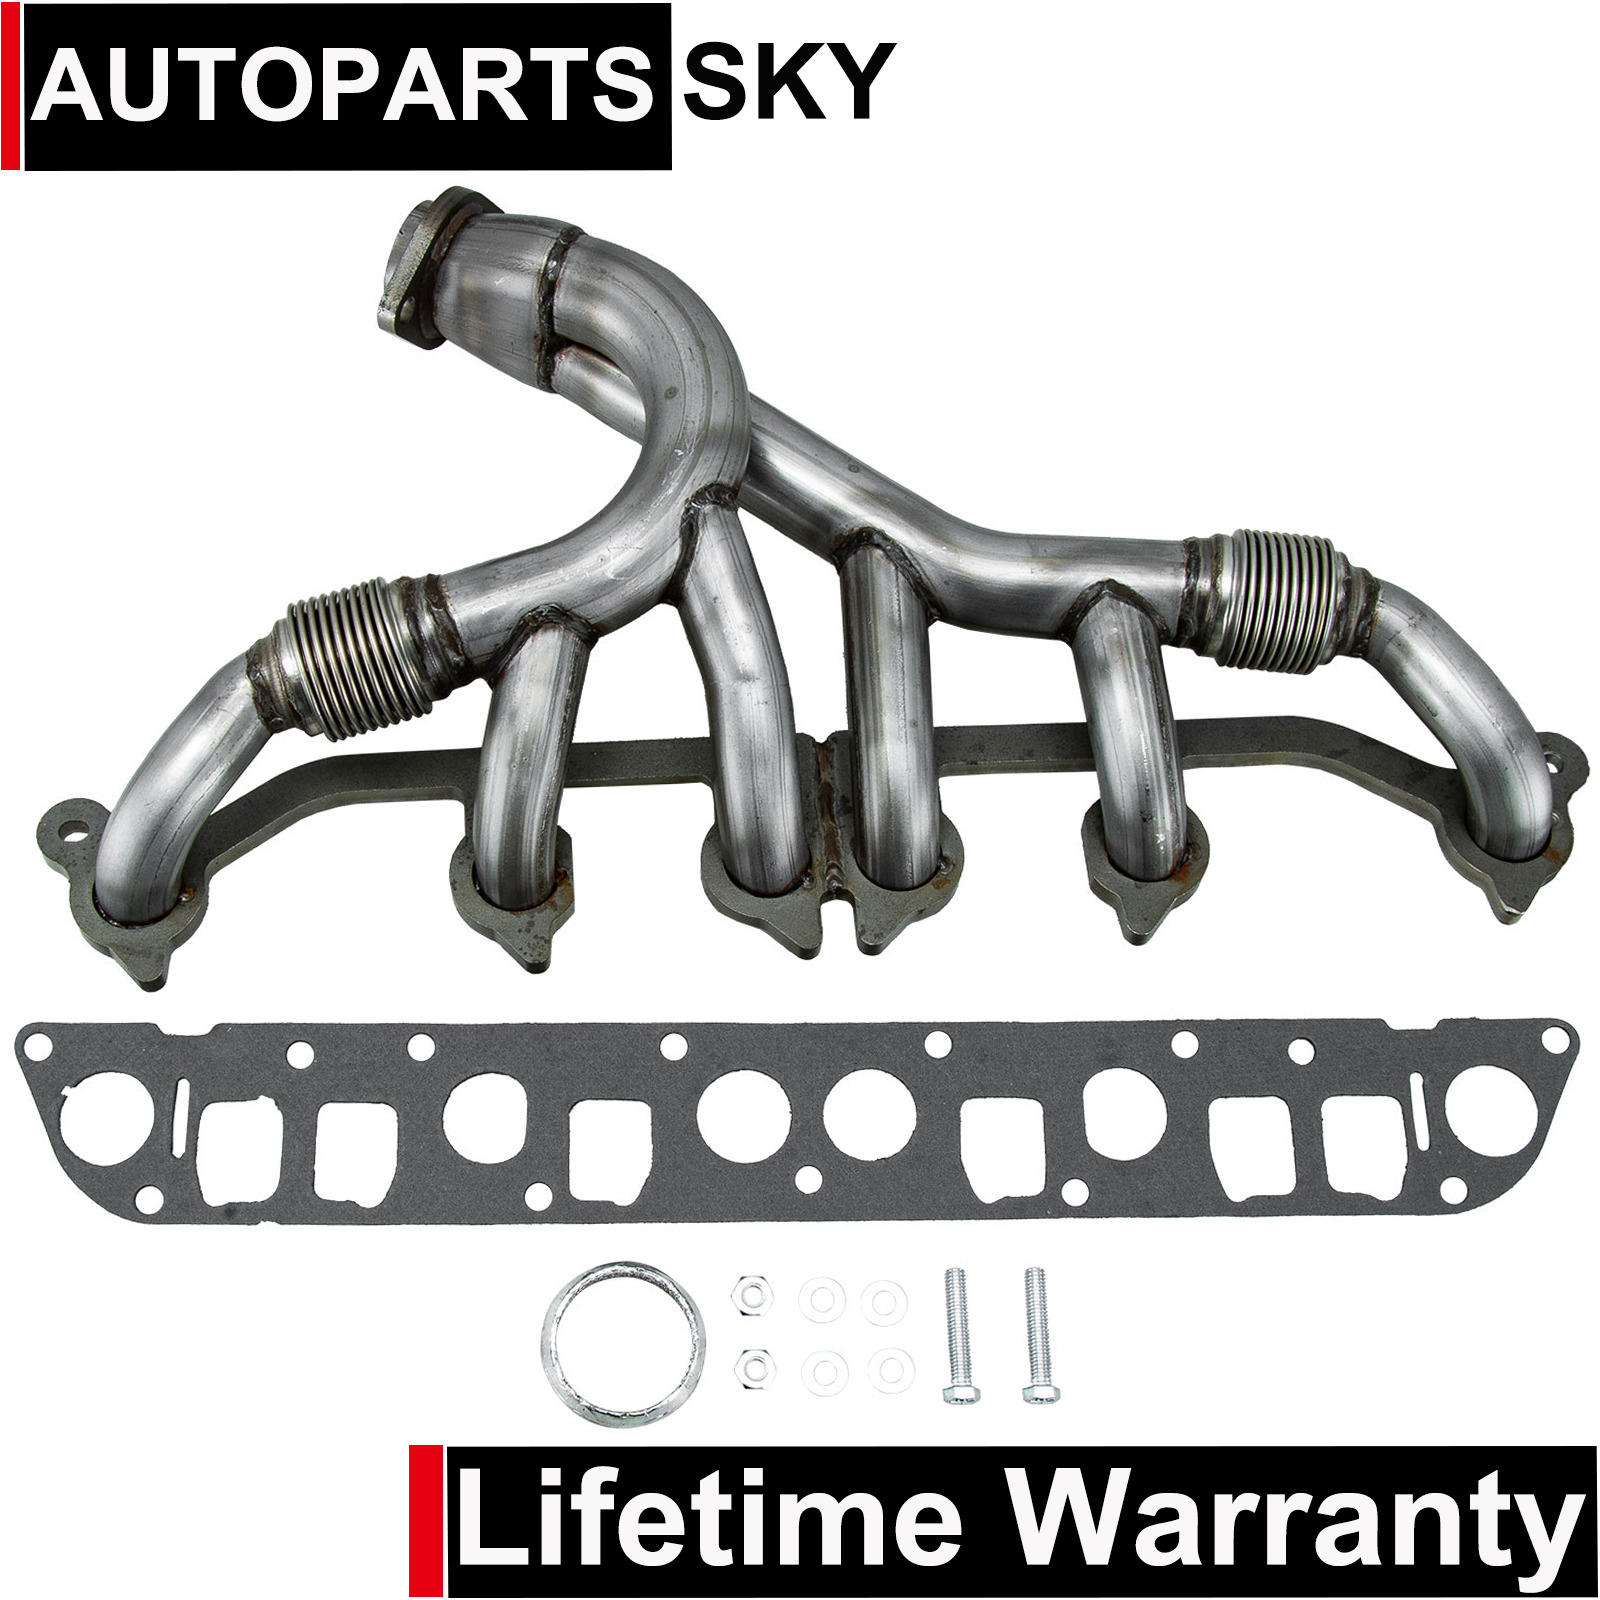 Stainless Steel Exhaust Manifold Gasket Kit For Jeep Grand Cherokee Wrangler